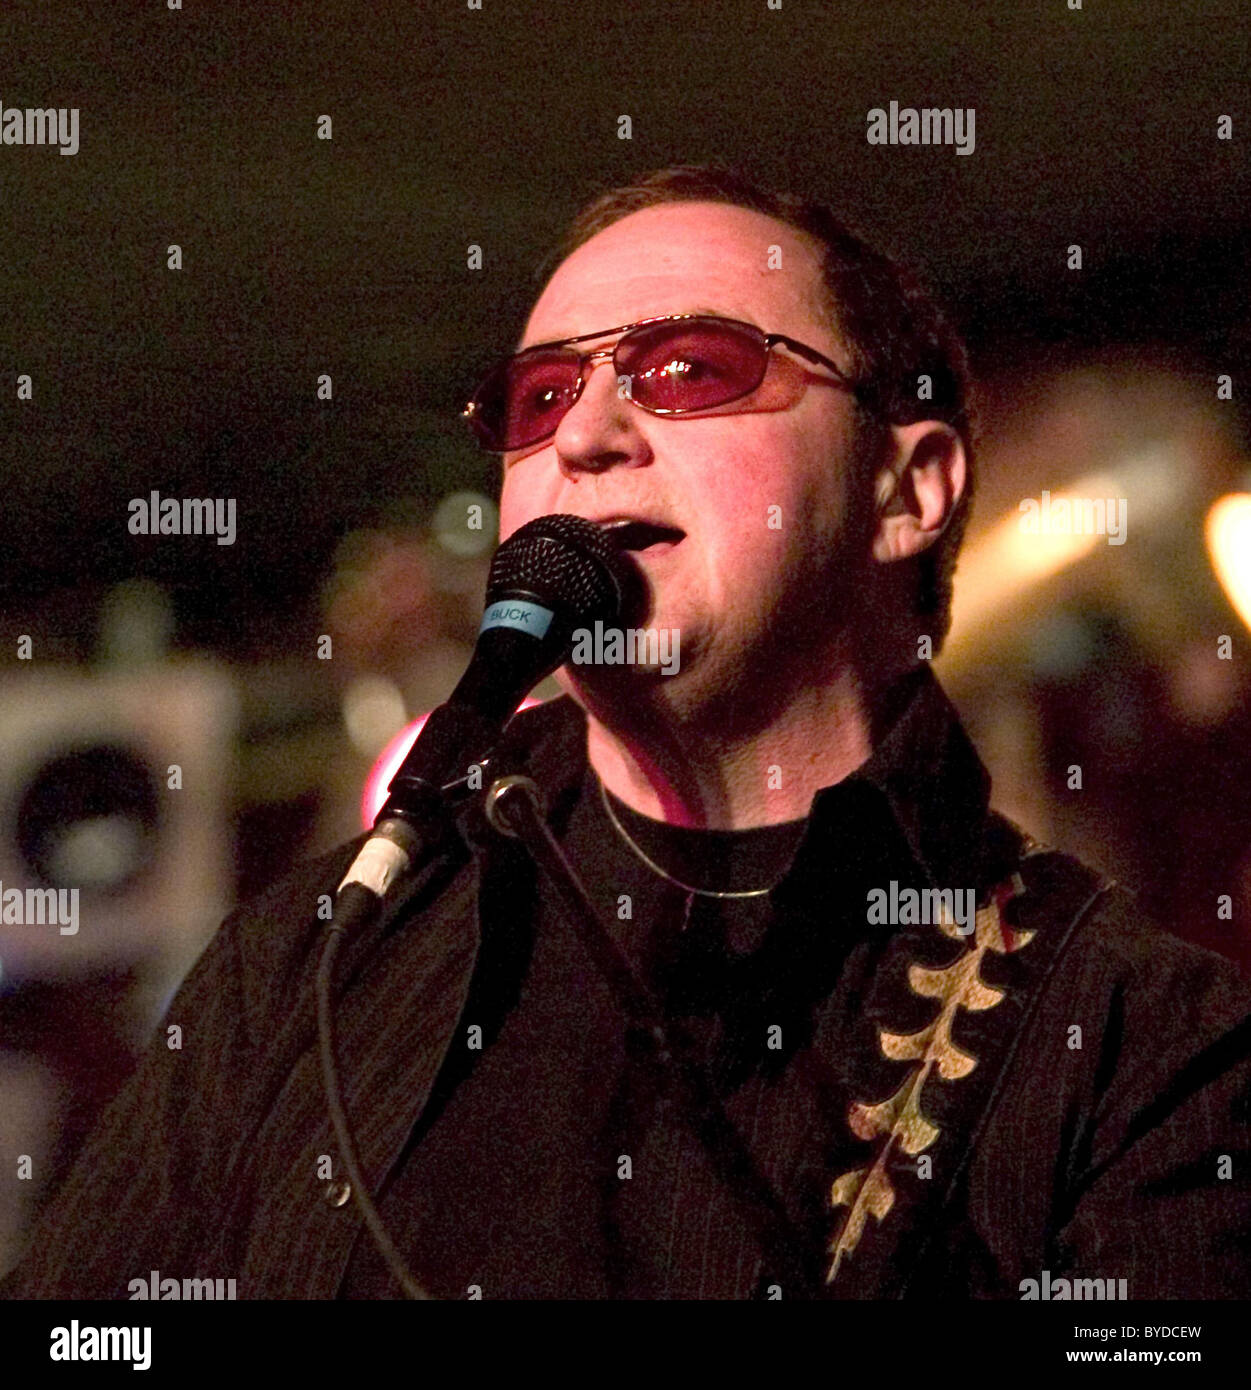 Blue Oyster Cult performing at BB King's Eric Bloom - Guitar Buck ...